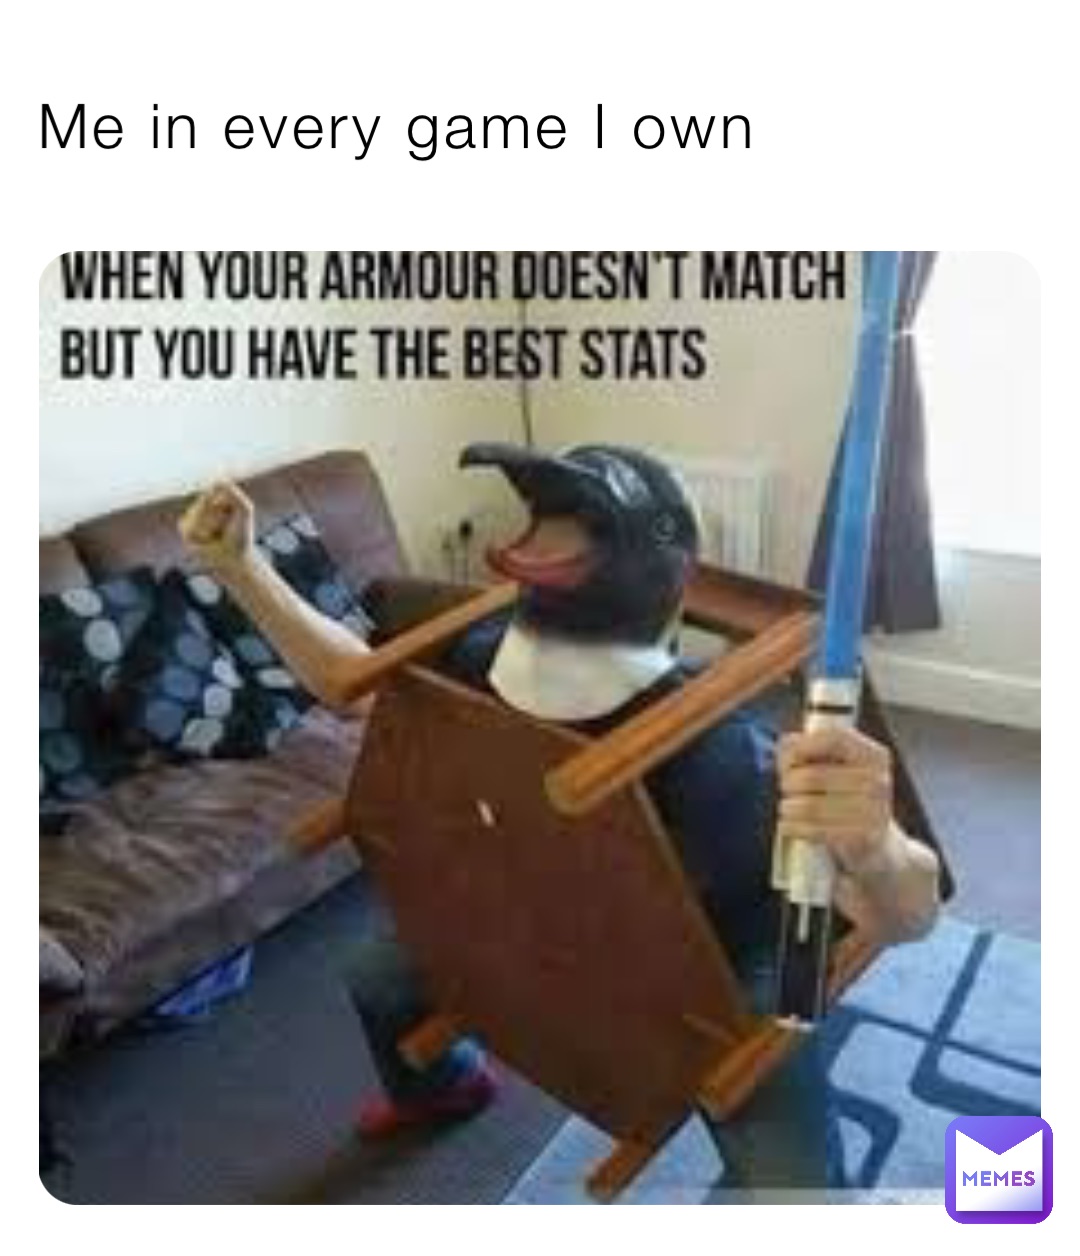 Me in every game I own